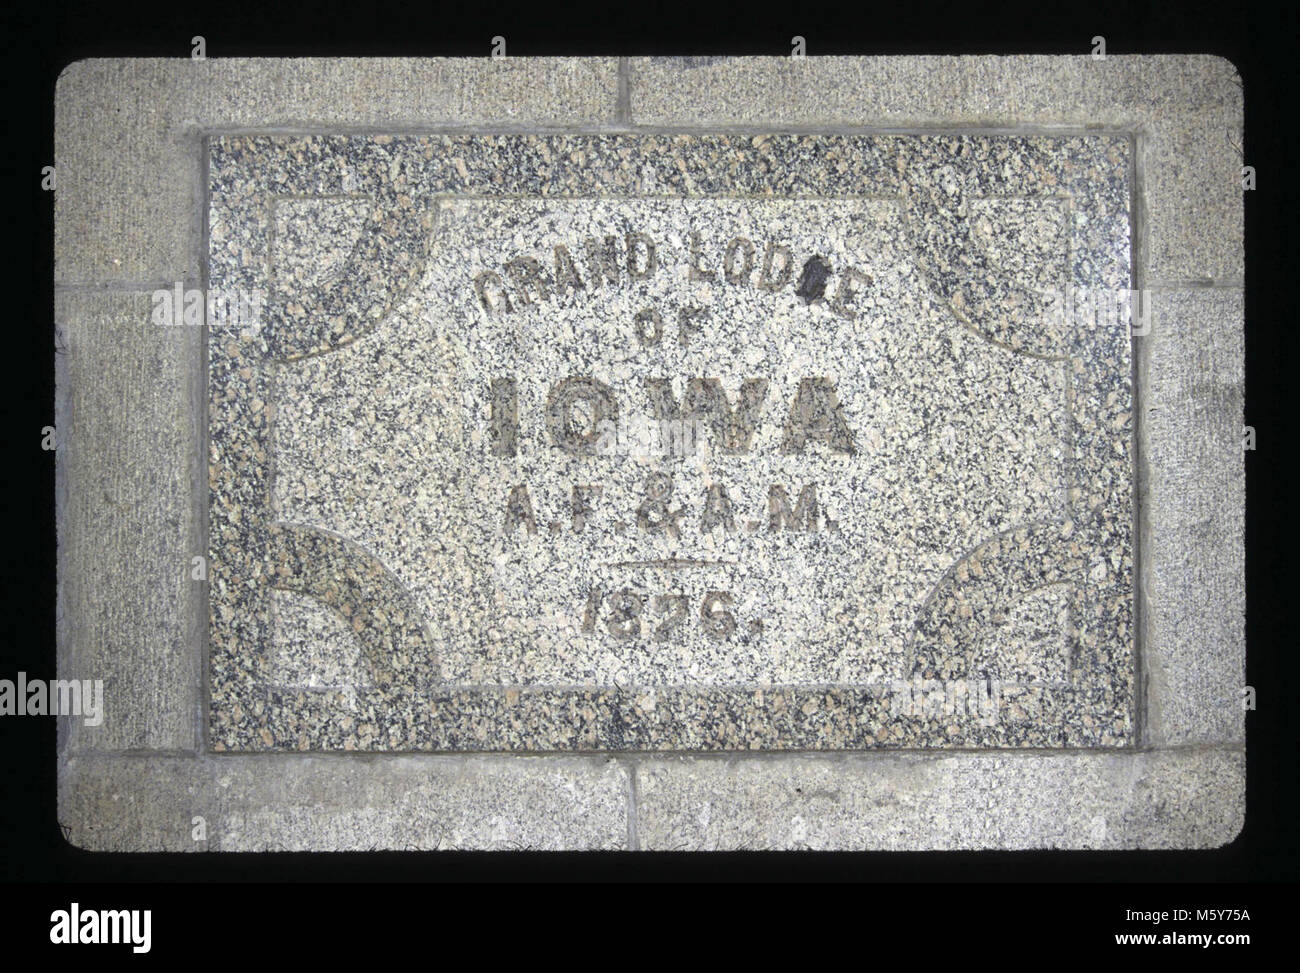 Masons, Grand Lodge of Iowa Level: 210-ft Donor: Masons, Grand Lodge of Iowa Dates: 1876/1885 Original material: granite  Dimensions: 2' 8 x 3' 11  Sculptor/Carver: not known Original inscription: Grand Lodge of Iowa A. F.  A. M. 1876. Stock Photo